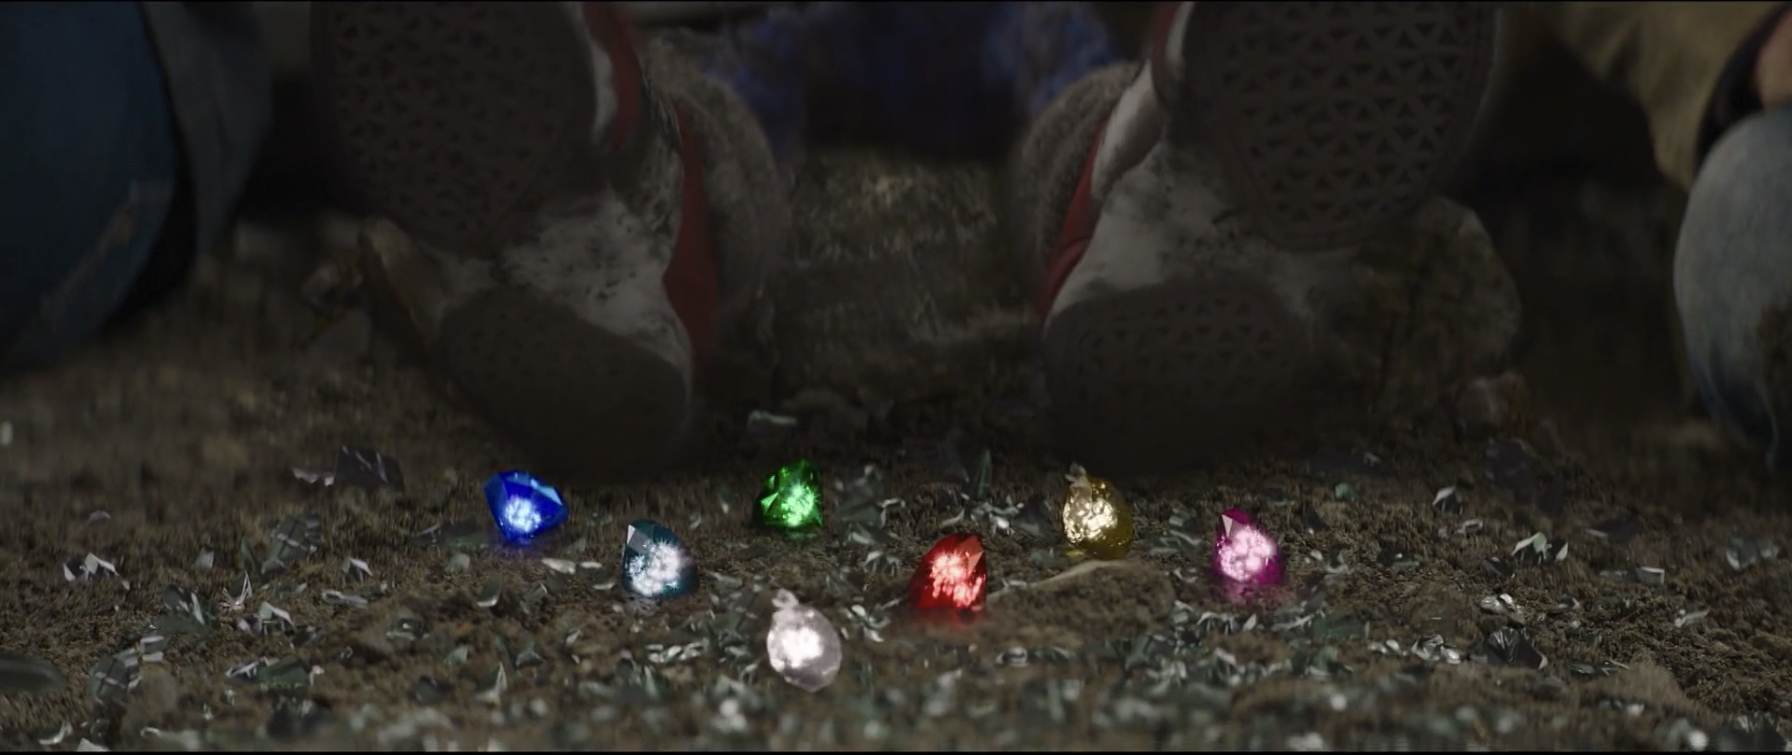 Sonic the Hedgehog 3 - Chaos Emeralds  Chaos emeralds, Sonic the hedgehog,  Sonic